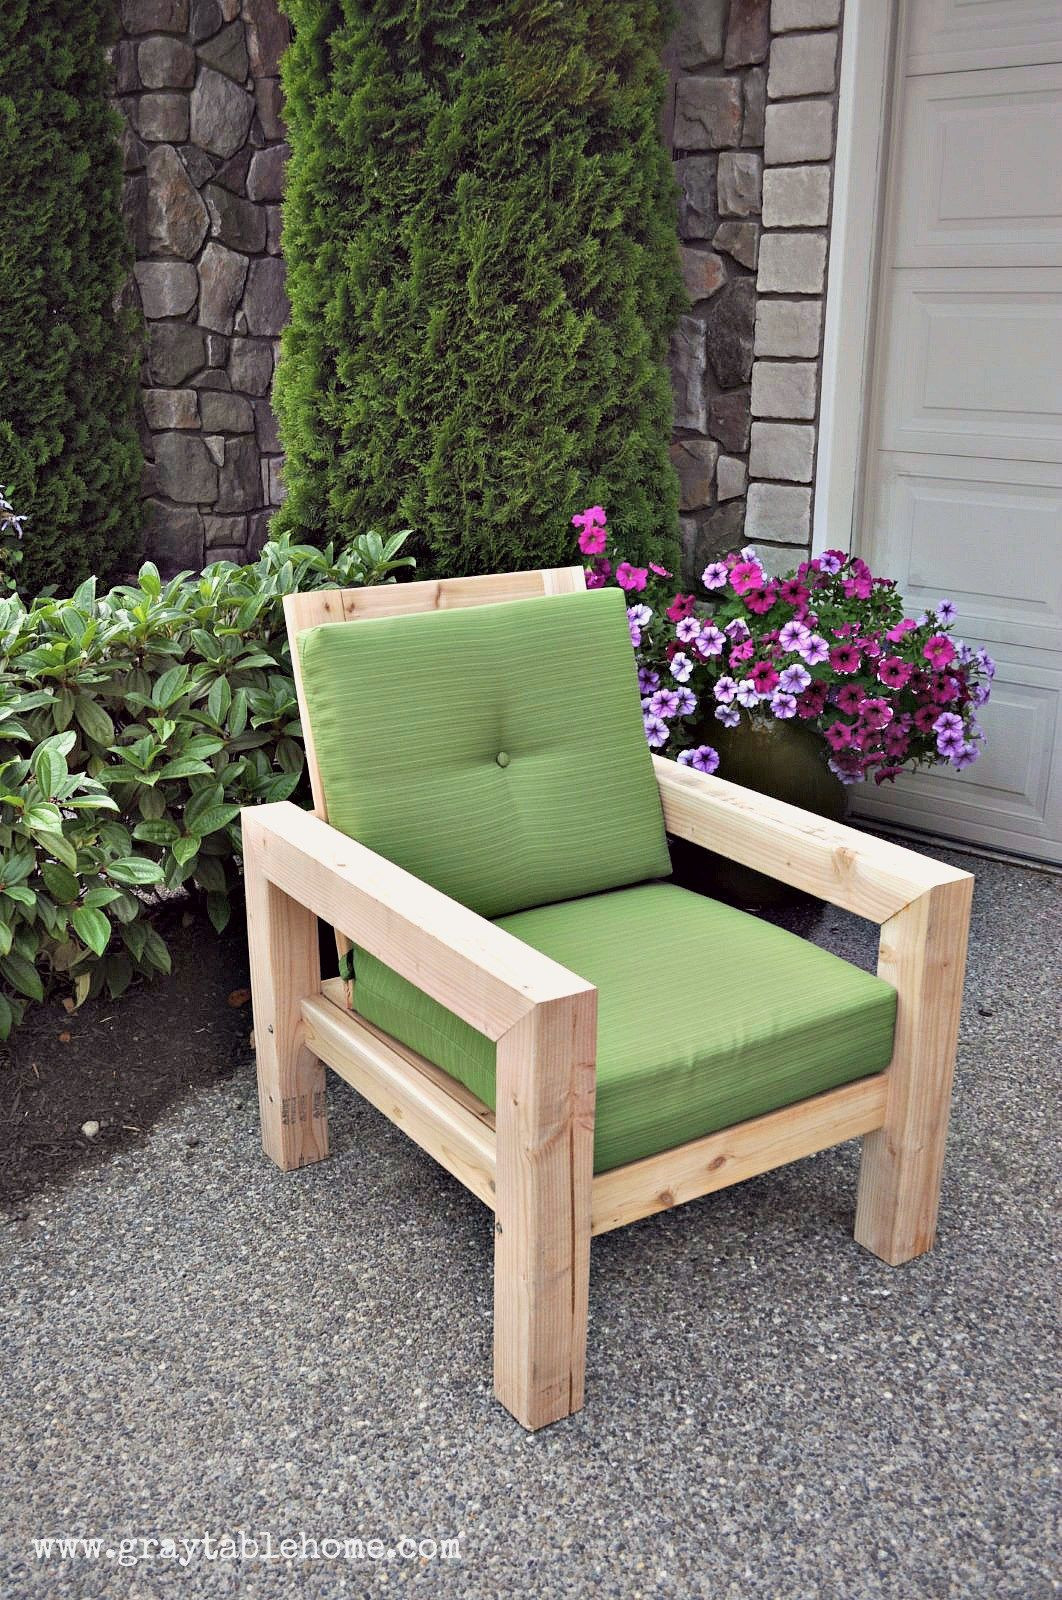 Free DIY Outdoor Furniture Plans
 DIY Modern Rustic Outdoor Chair plans using outdoor